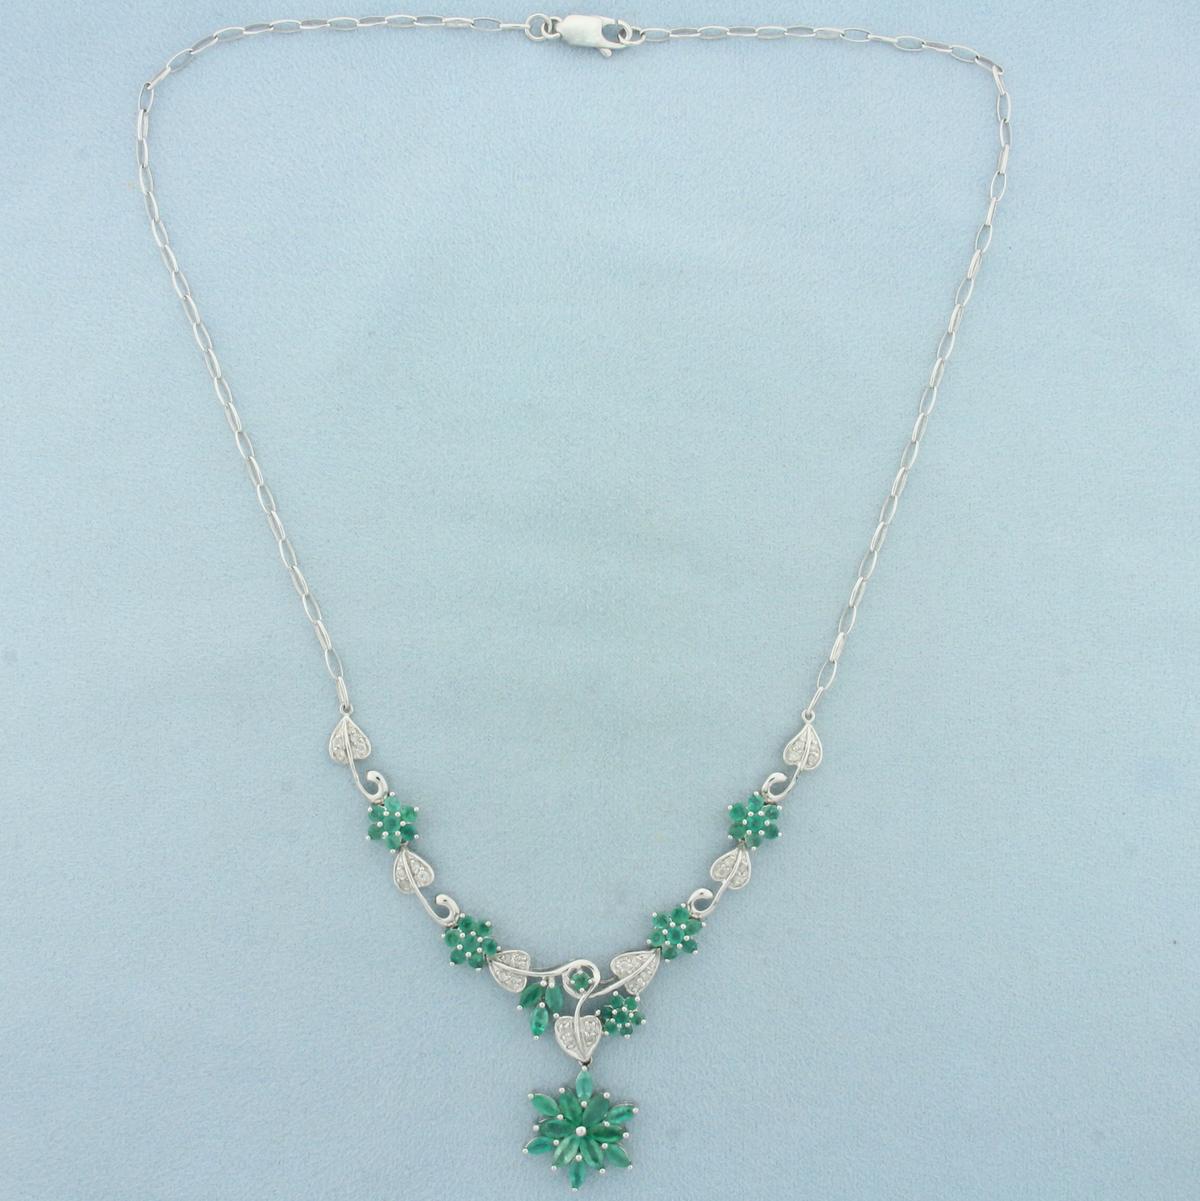 6ct Emerald And Diamond Flower Design Necklace In 14k White Gold